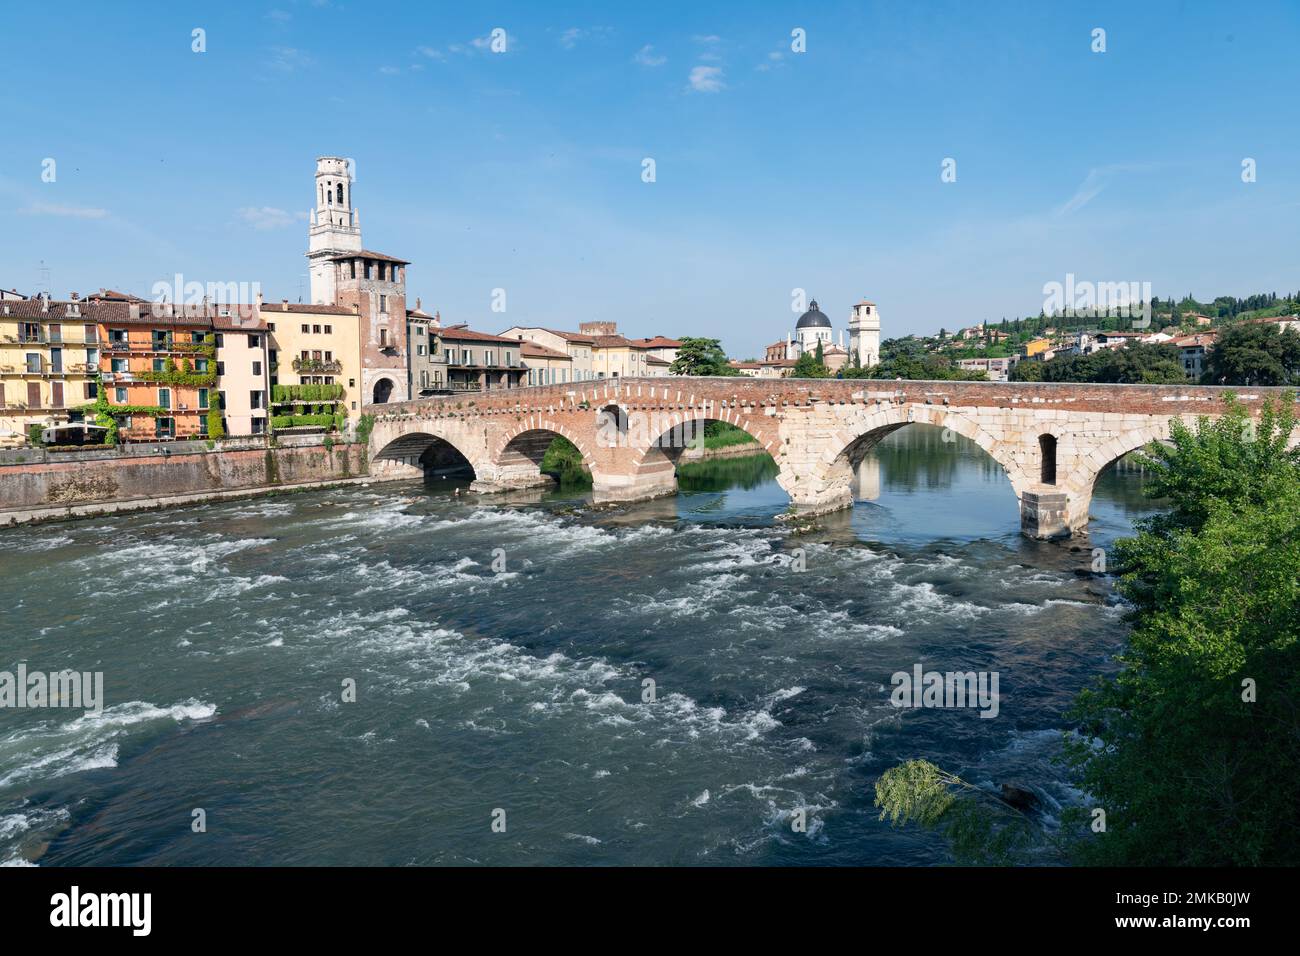 Fast moving water flowing under the arches of the Ponte Pietra bridge which spans the Fiume Adige in Verona, Italy set against clear blue skies Stock Photo